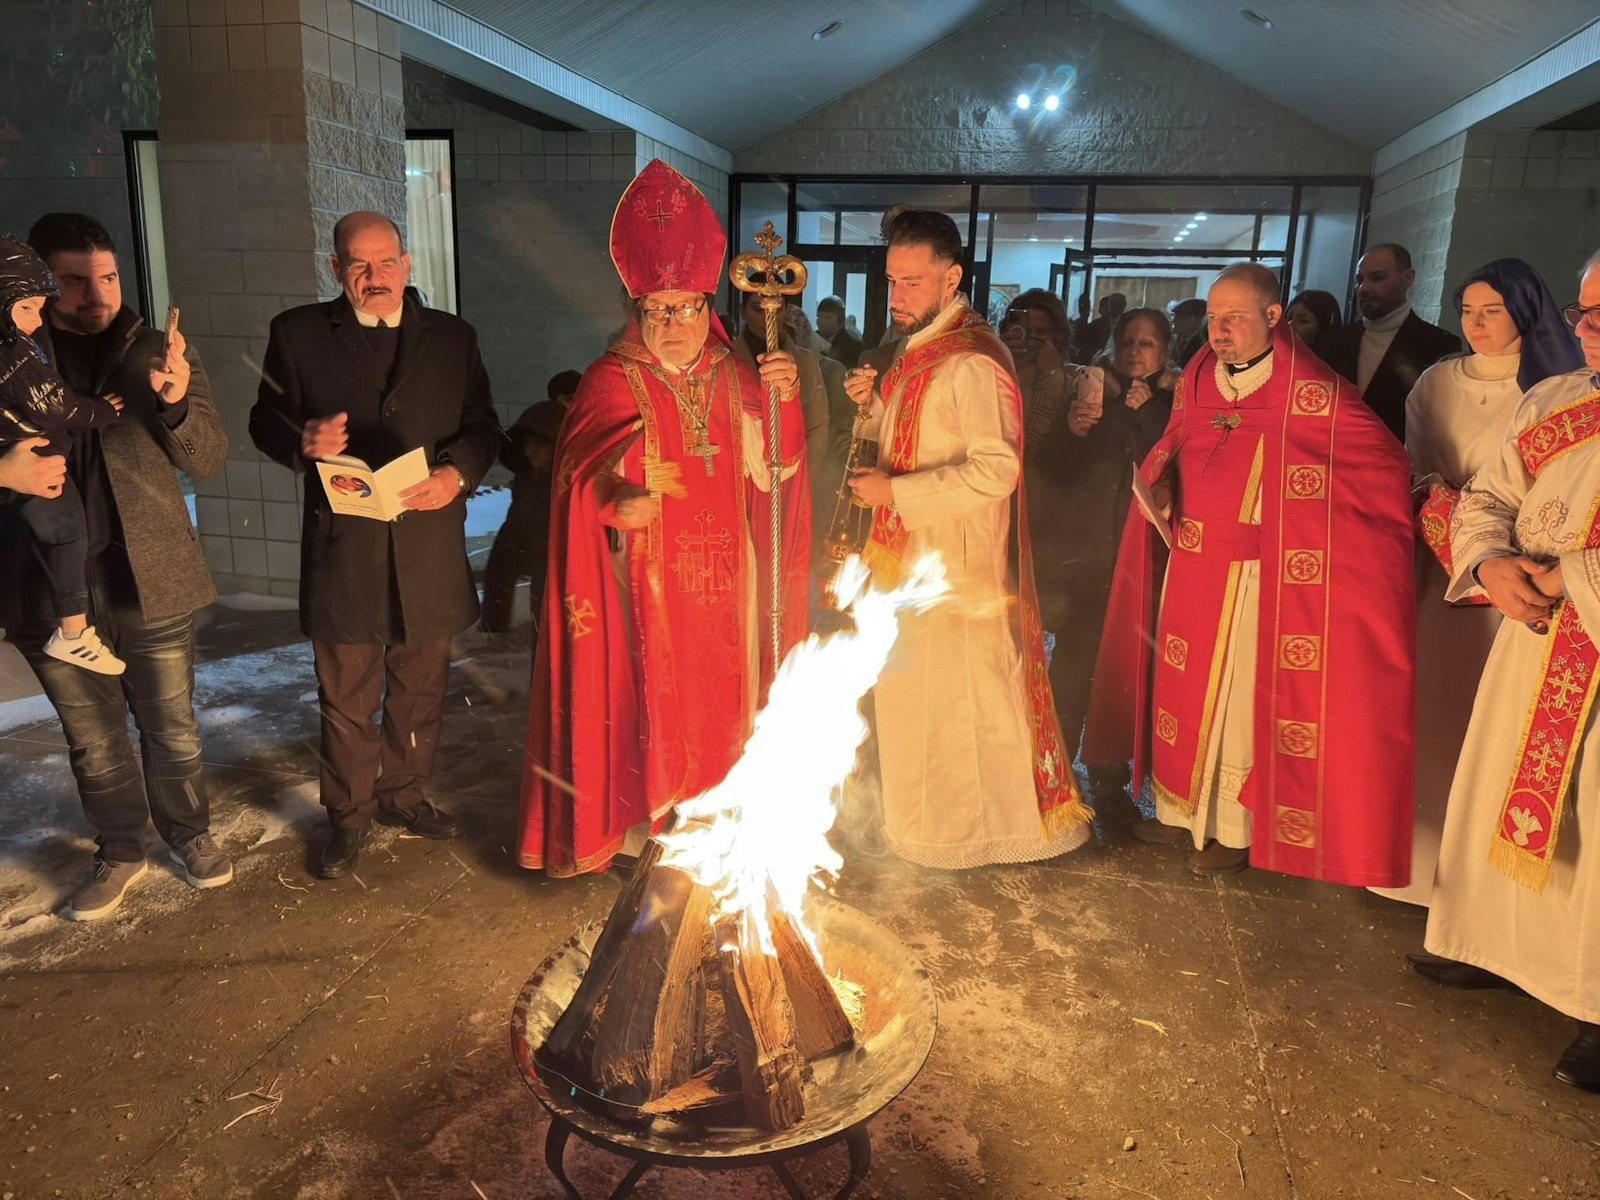 Bishop Habash prays over the Christmas fire outside St. Toma Syriac Catholic Cathedral during a Christmas liturgy. Churches like St. Toma are home to a large number of Iraqi and Syrian refugees, whose faith in the face of persecution inspires the community, Bishop Habash said. (Courtesy of St. Toma Syriac Catholic Cathedral)